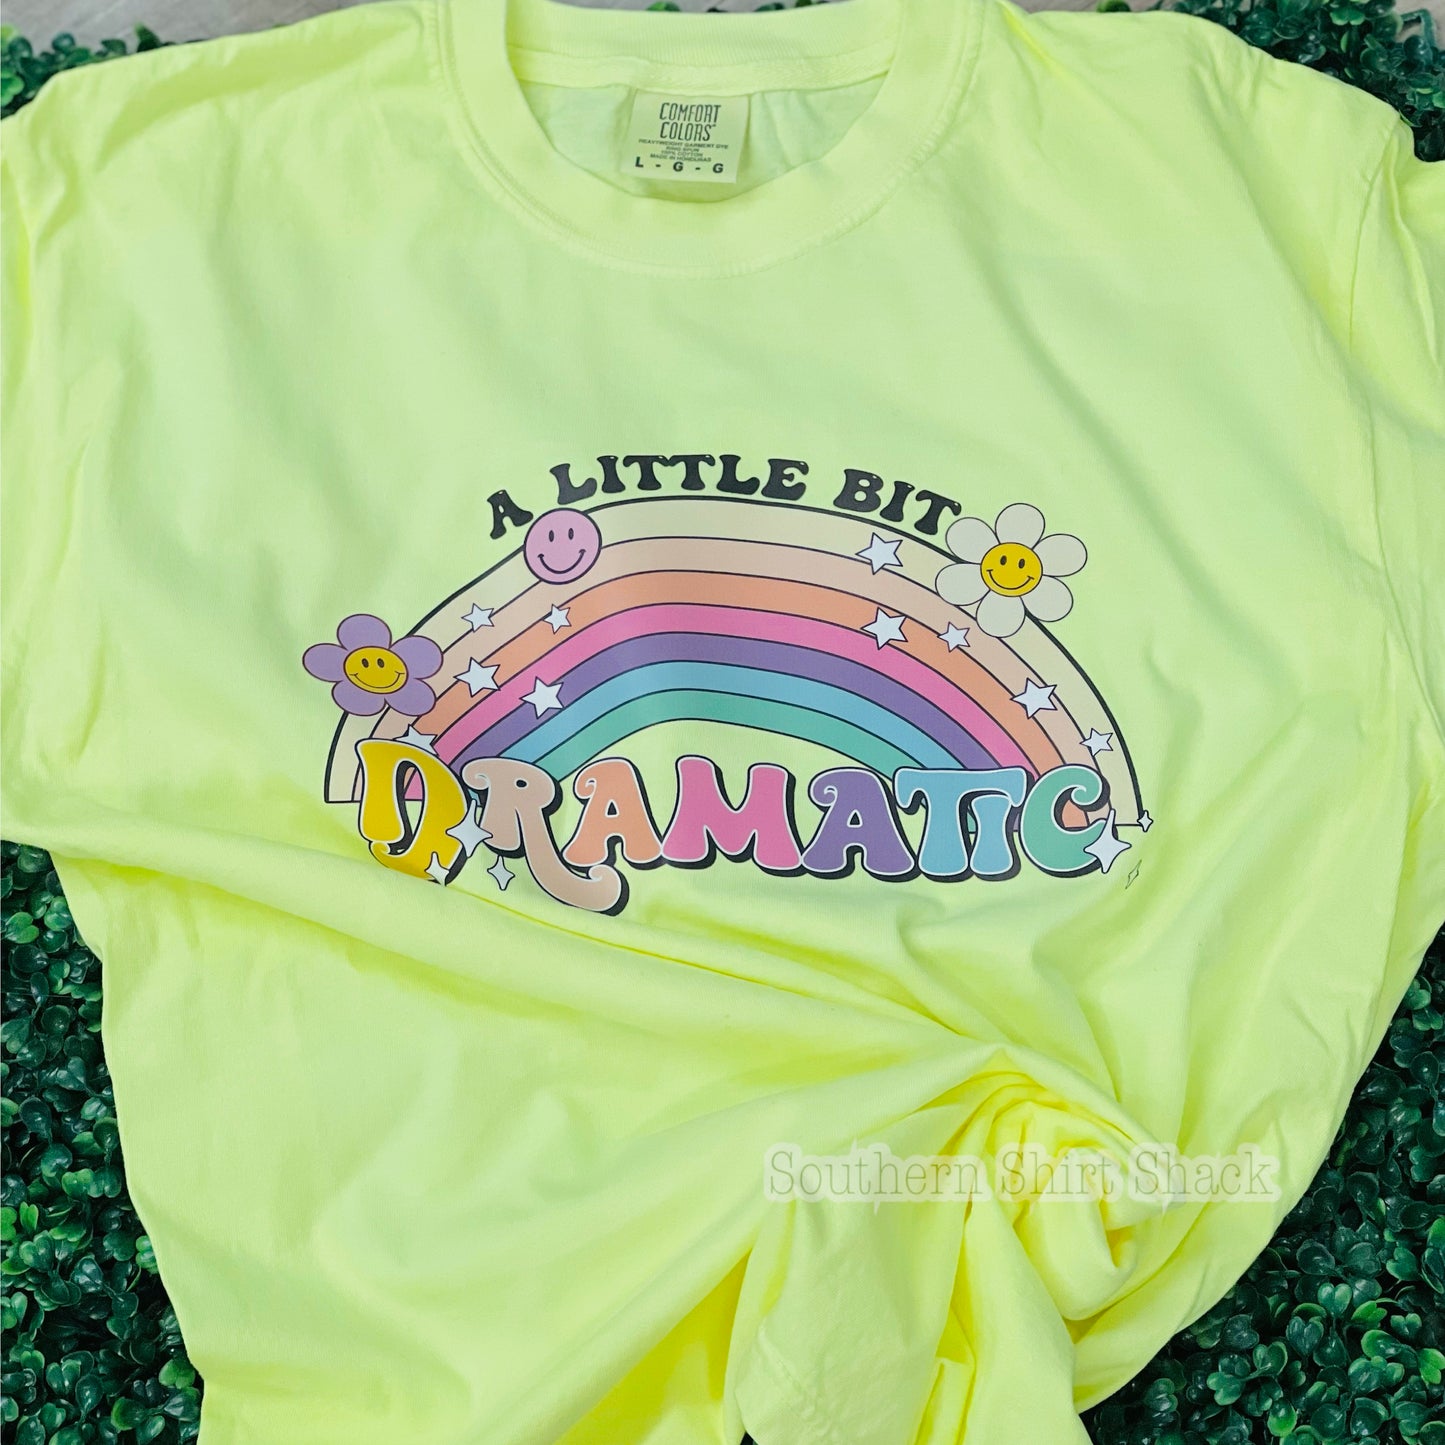 A little bit dramatic ~ groovy | Comfort Colors tee